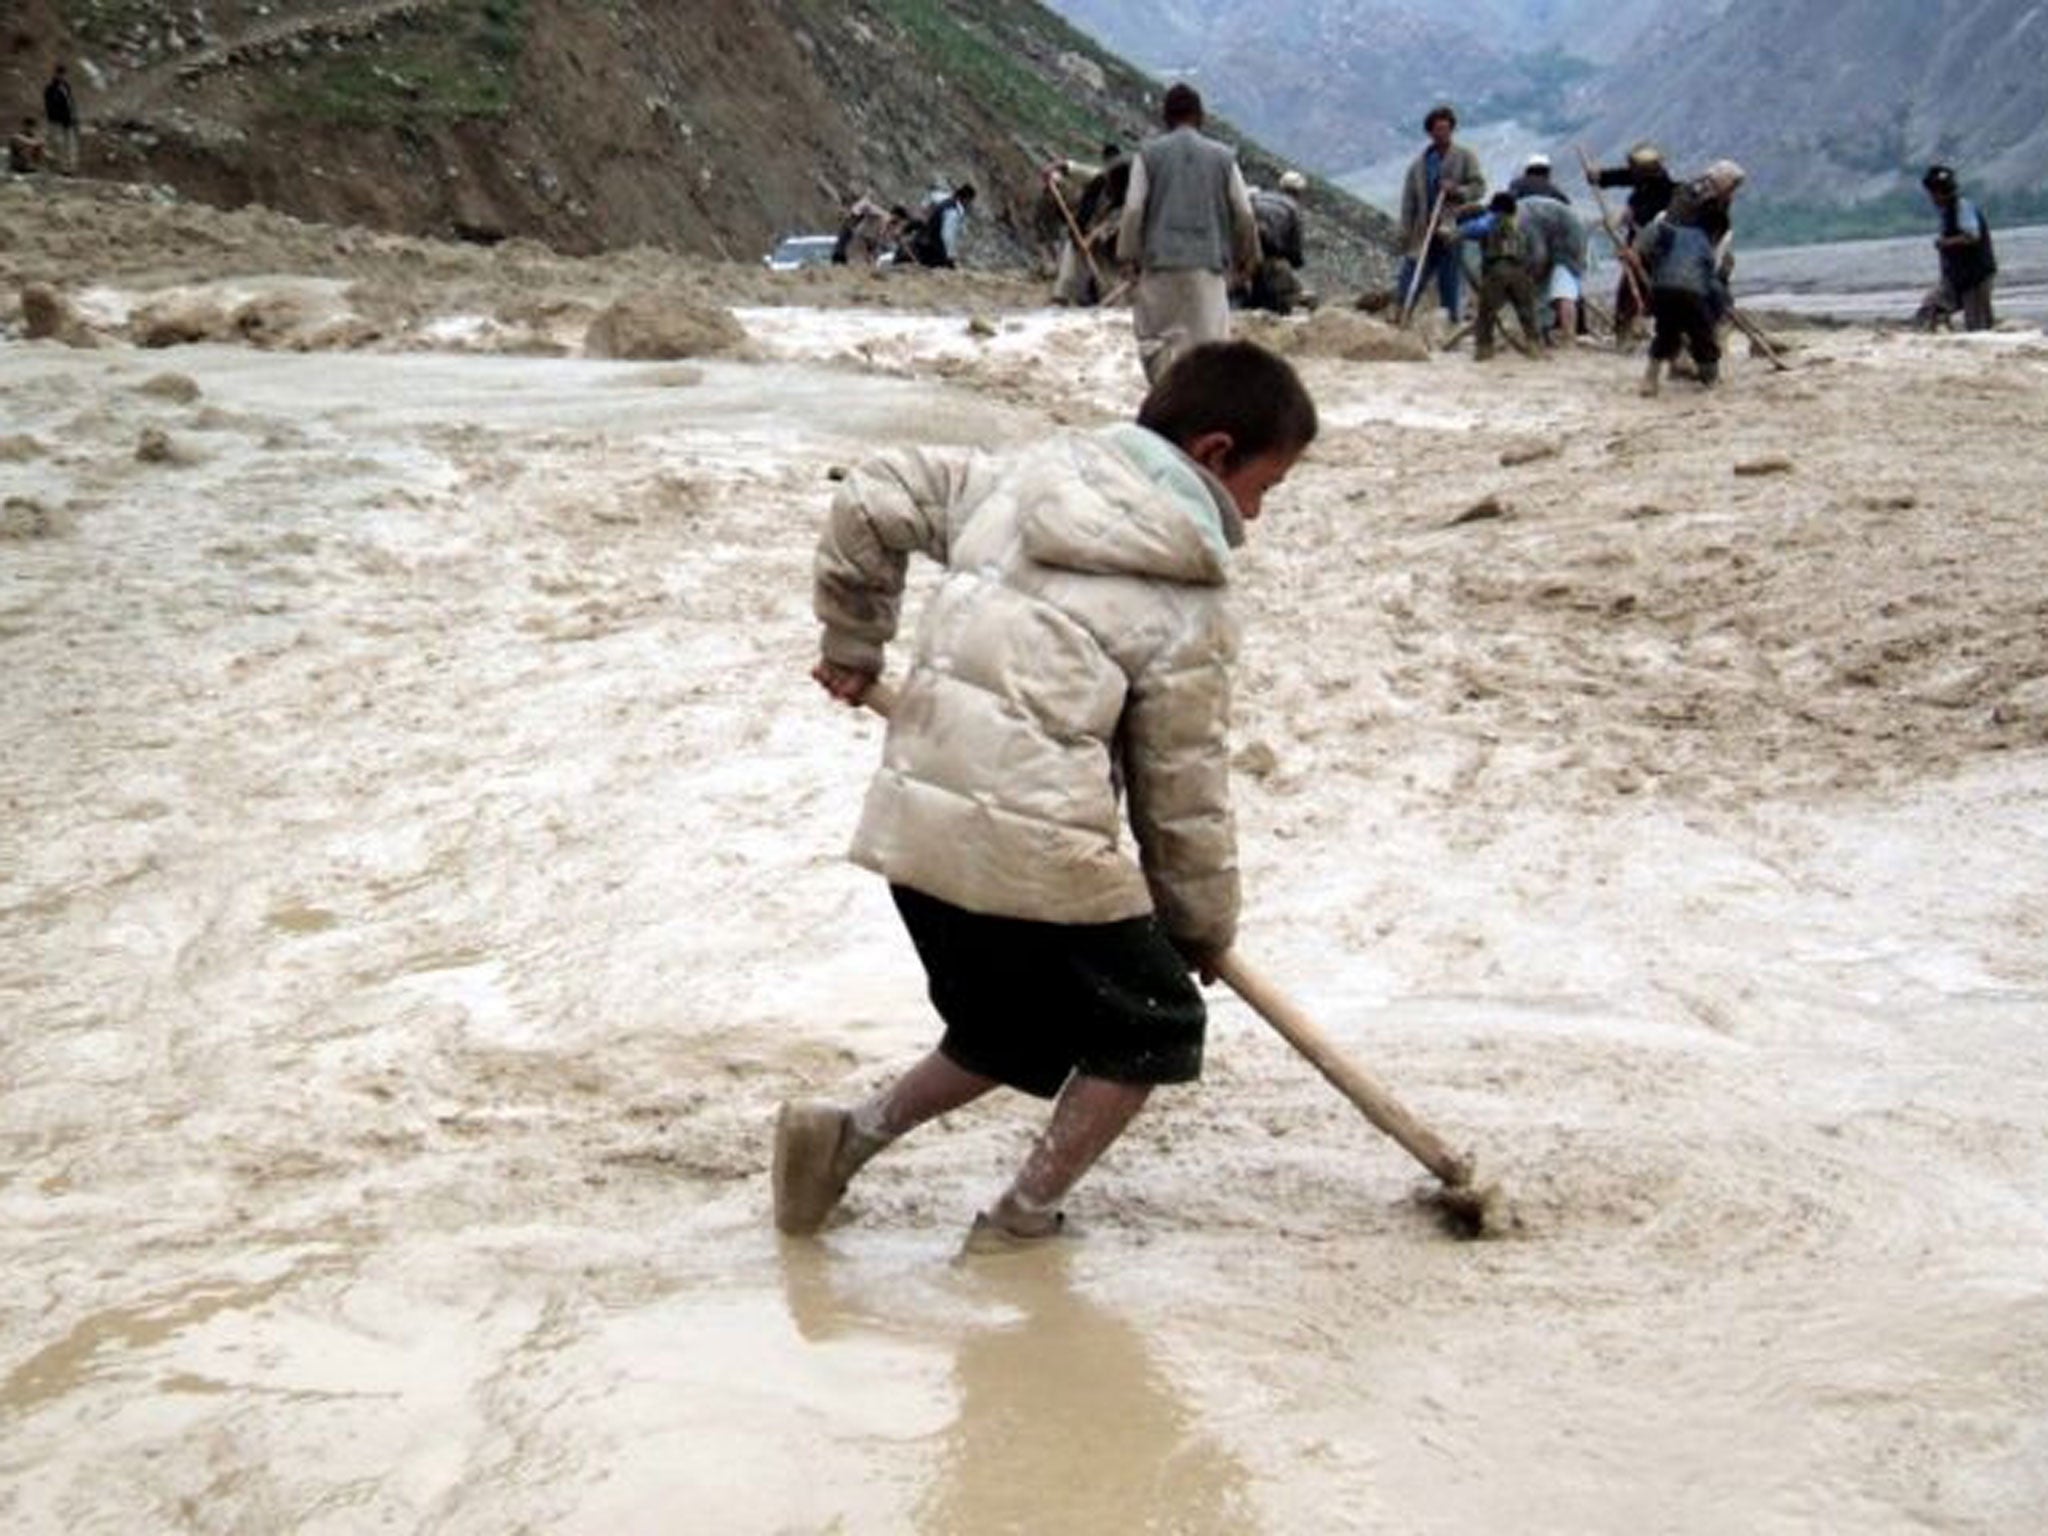 Workers removing debris from a road affected by flash floods in Badakhshan, Afghanistan. As in 2012, the area has been hit again by a comparable disaster. At least 2,100 people are feared dead on 02 May 2014, after a mudslide, caused by heavy rainfalls, b